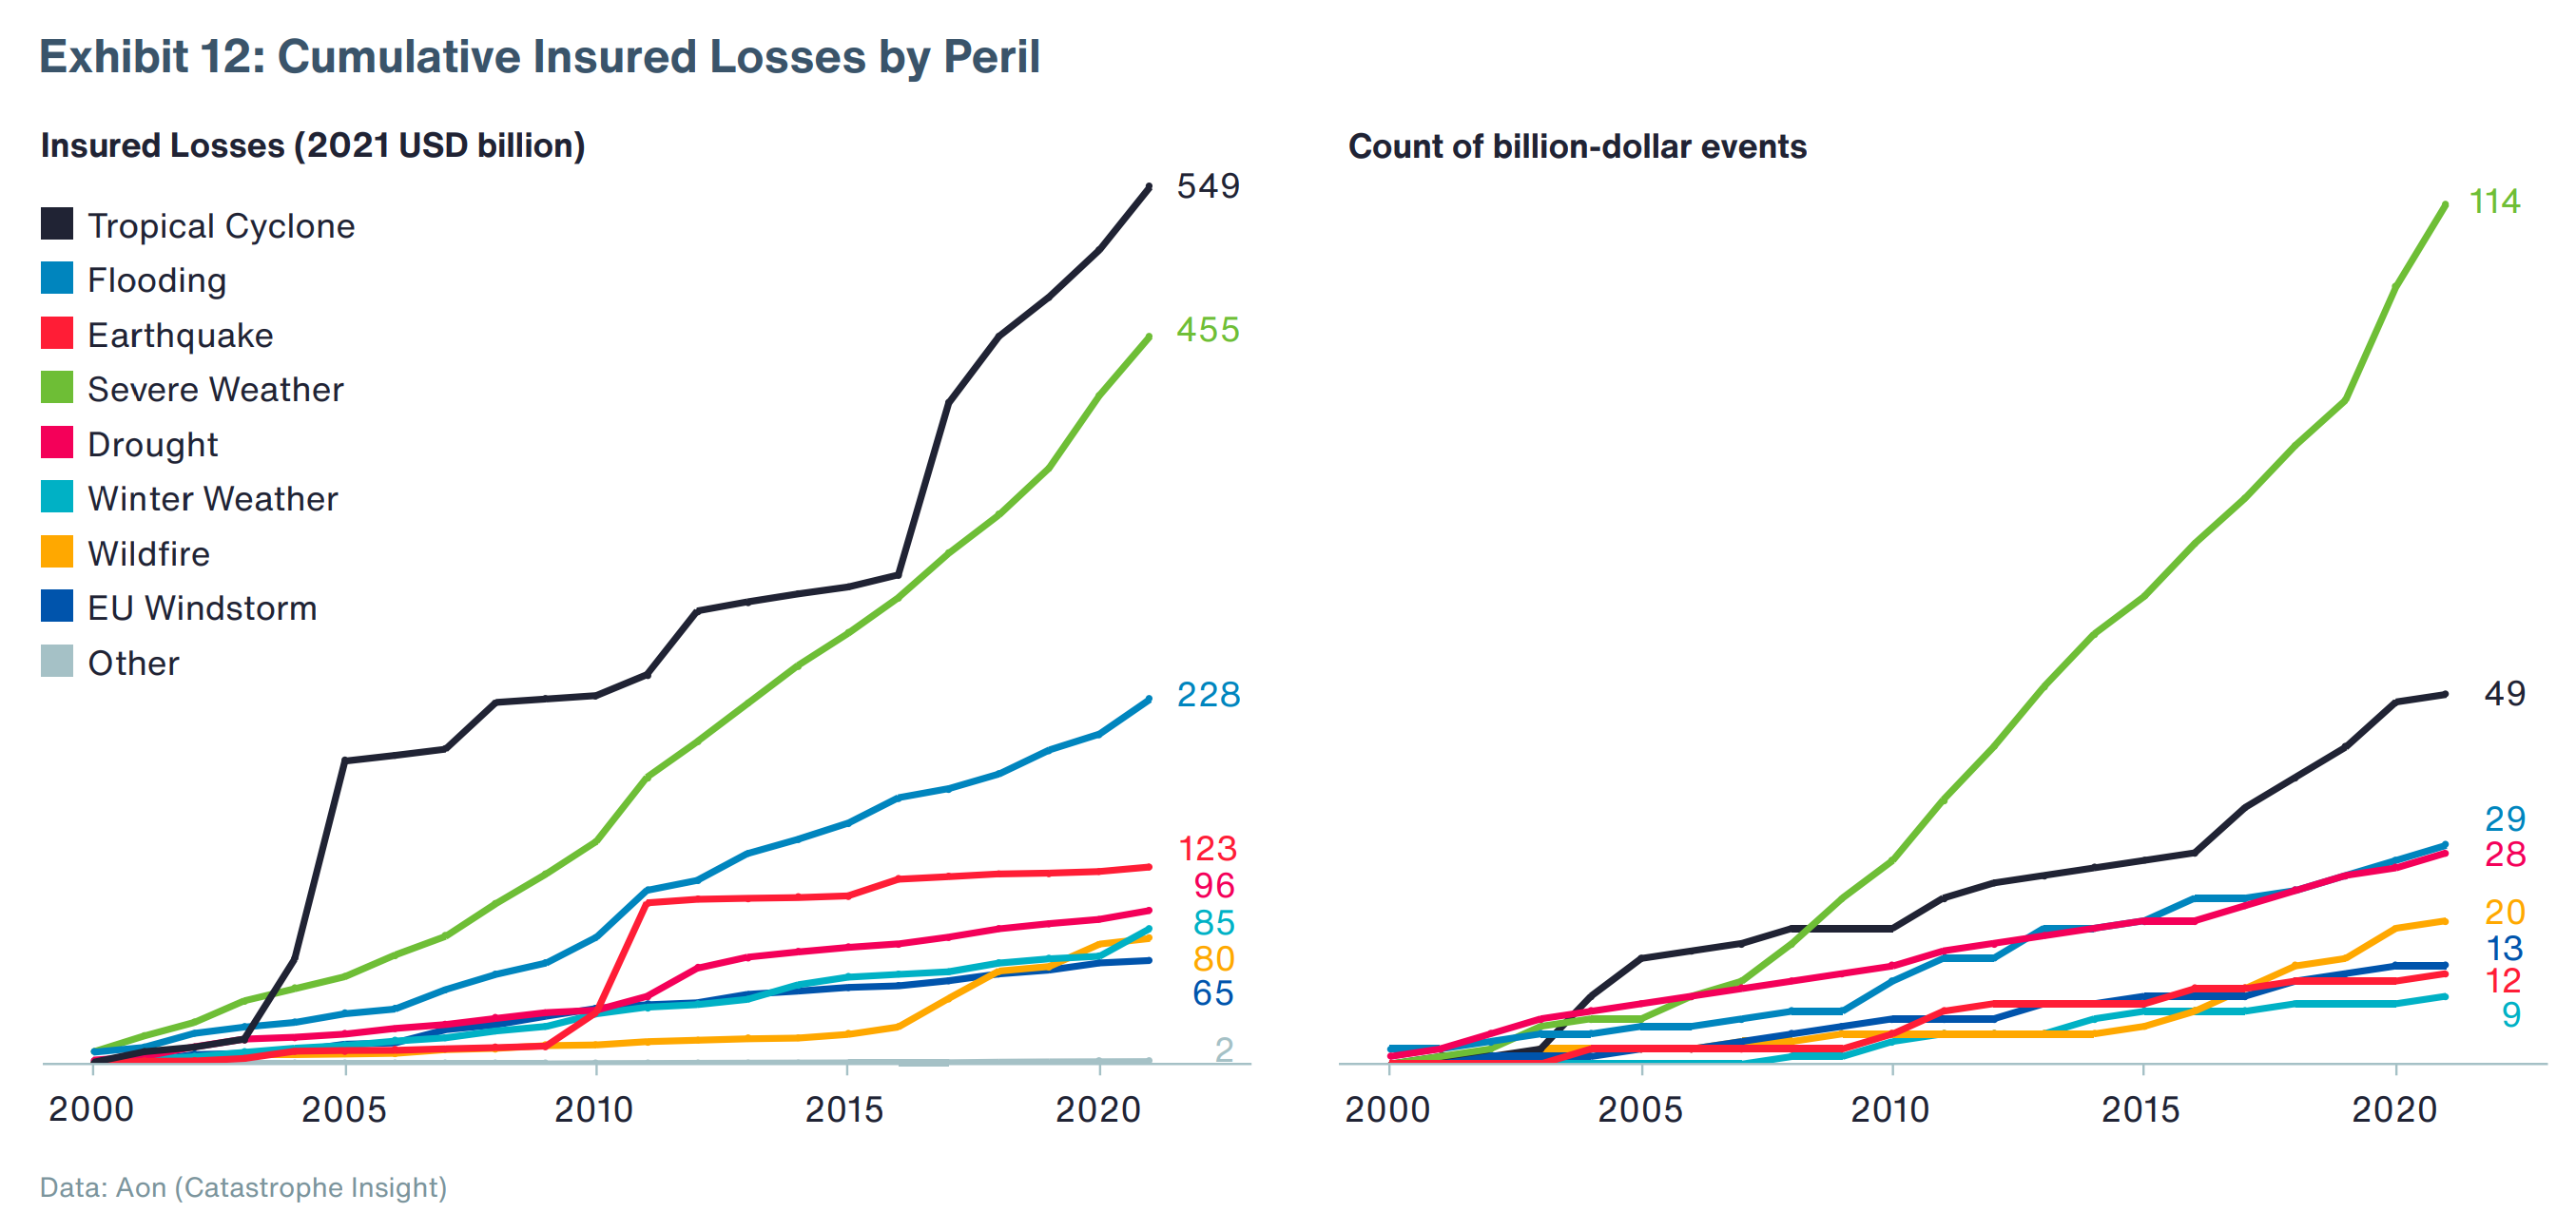 Cumulative global insured losses by peril in 2021. Aggregated costs for insurers have been largely dominated by the Tropical Cyclone and Severe Weather perils this century. The two perils combined for more than $1 trillion, or 60 percent of the total cumulative industry losses, of which roughly 74 percent was incurred in the United States. The Severe Convective Storm peril has also increasingly separated itself as accounting for the highest number of billion-dollar events. Graphic: Aon